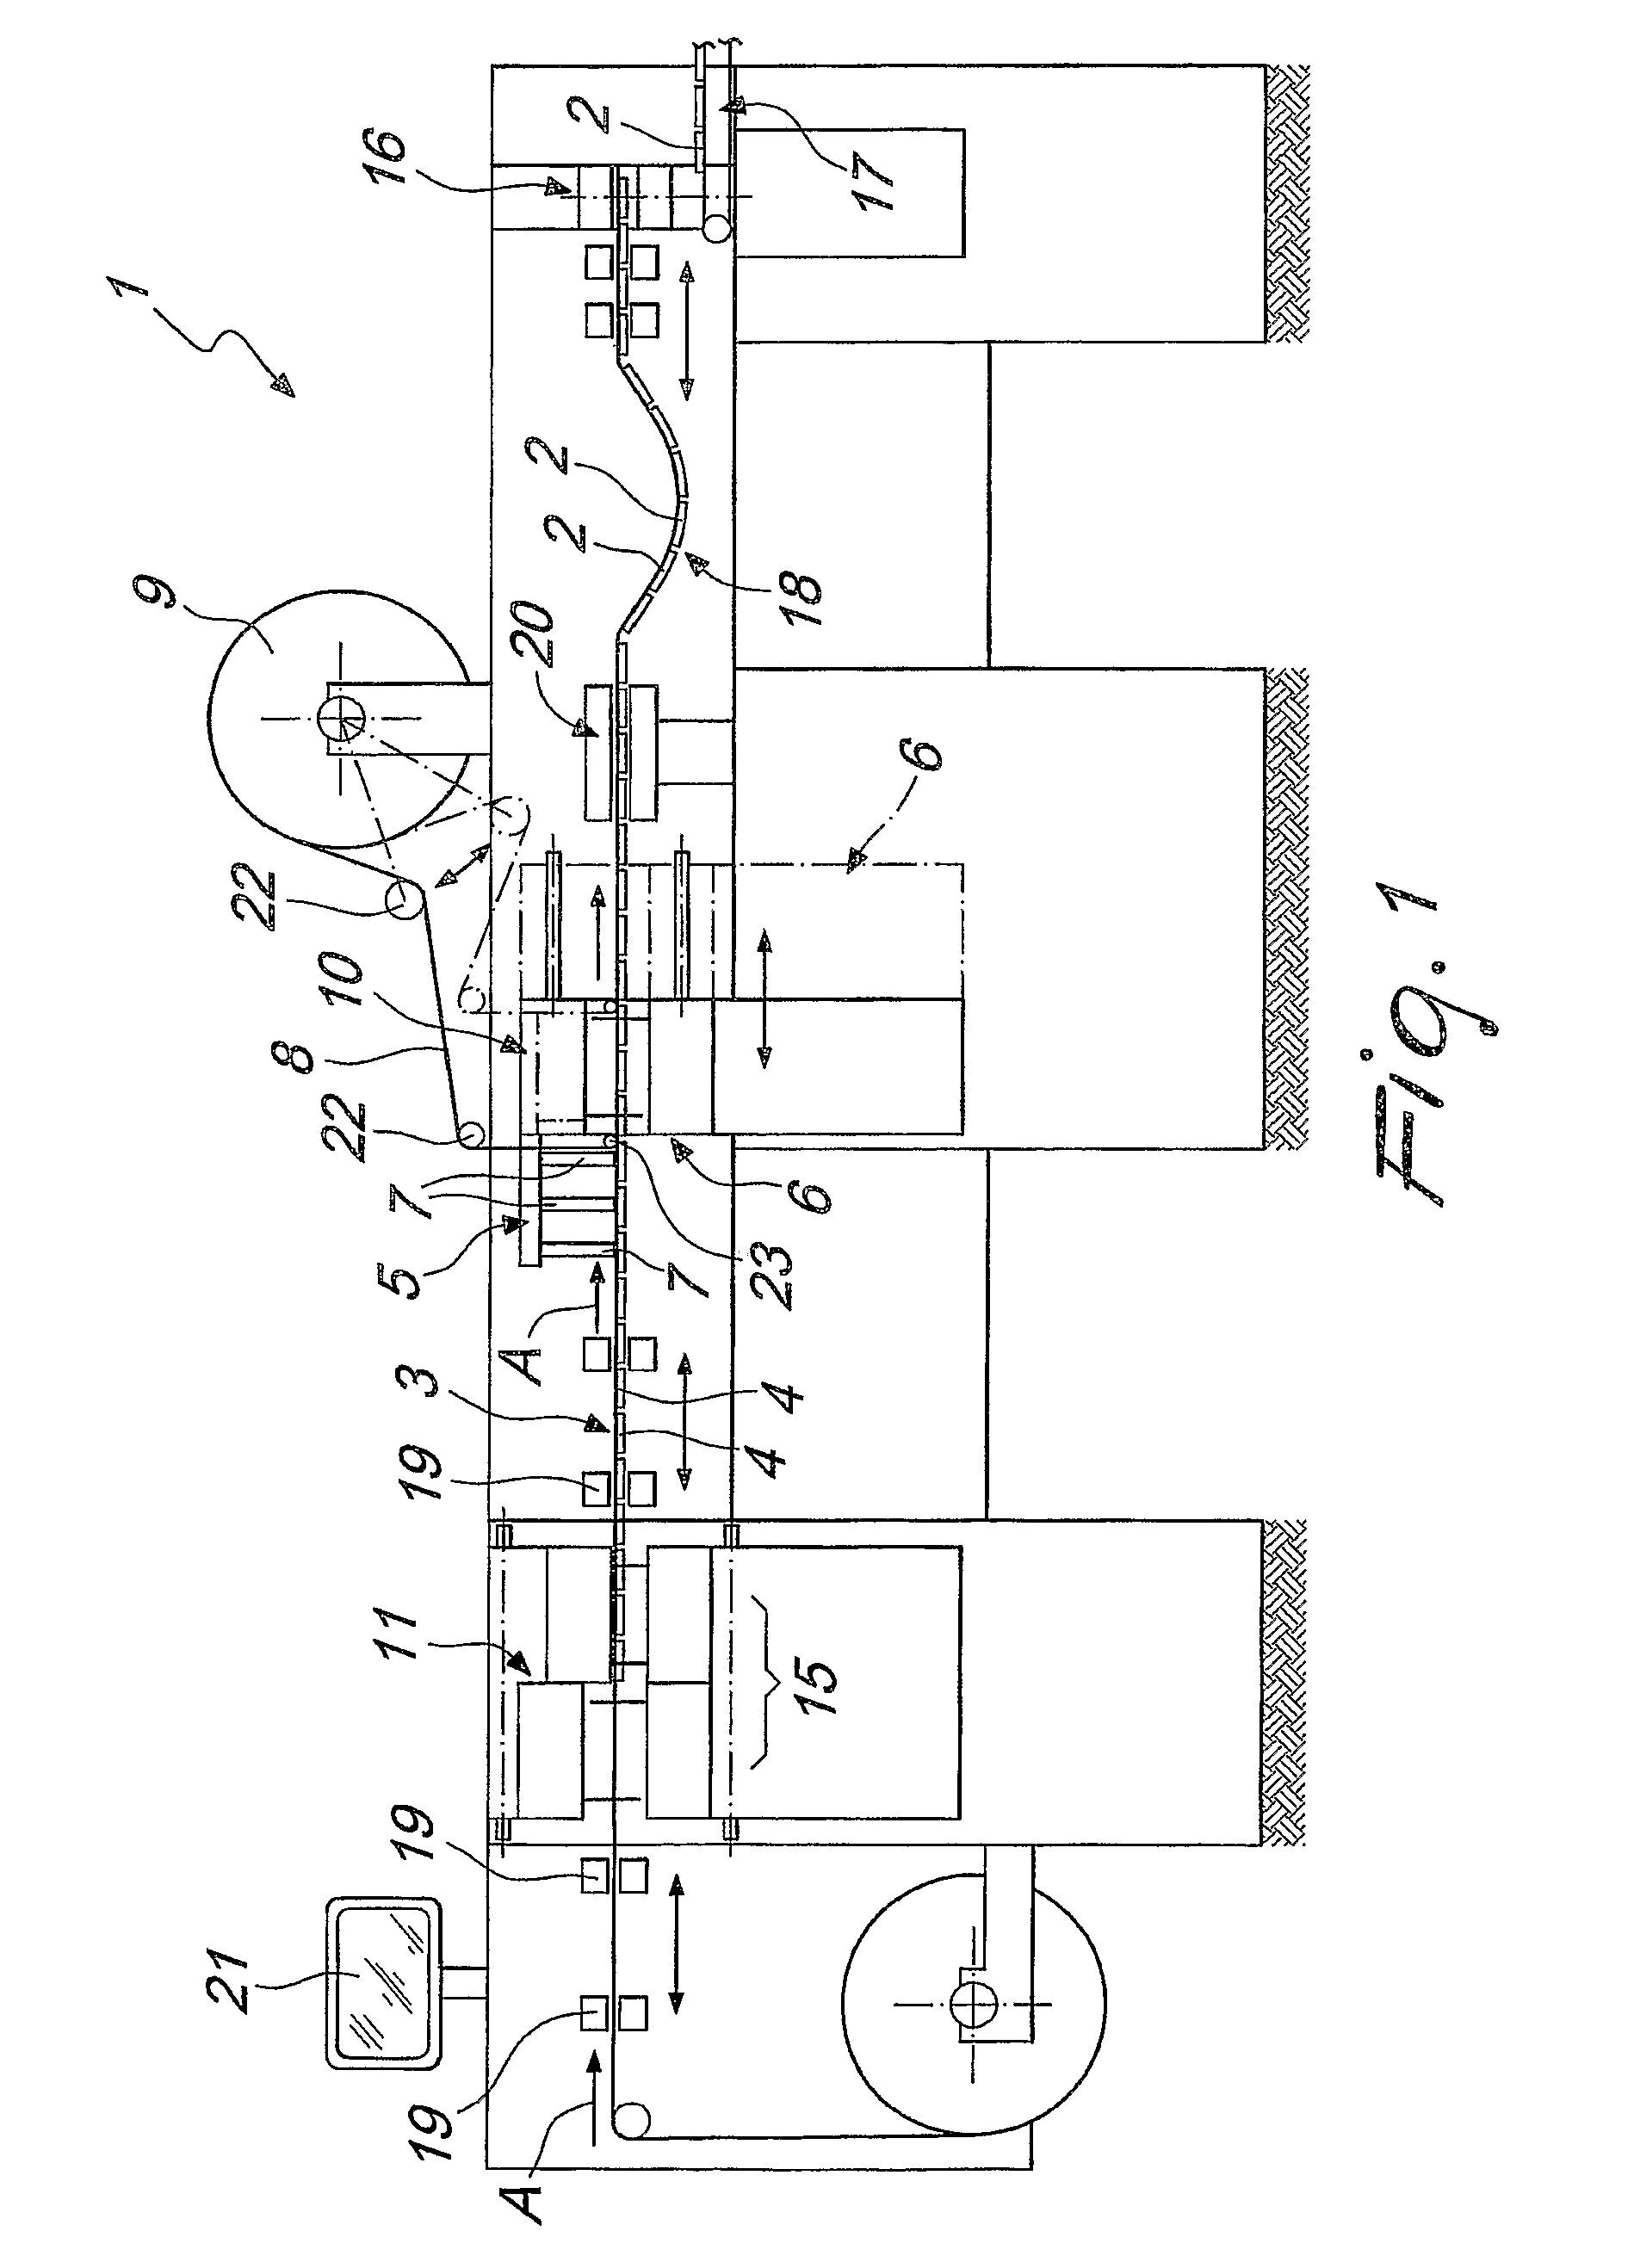 Method and apparatus for manufacturing packages of products